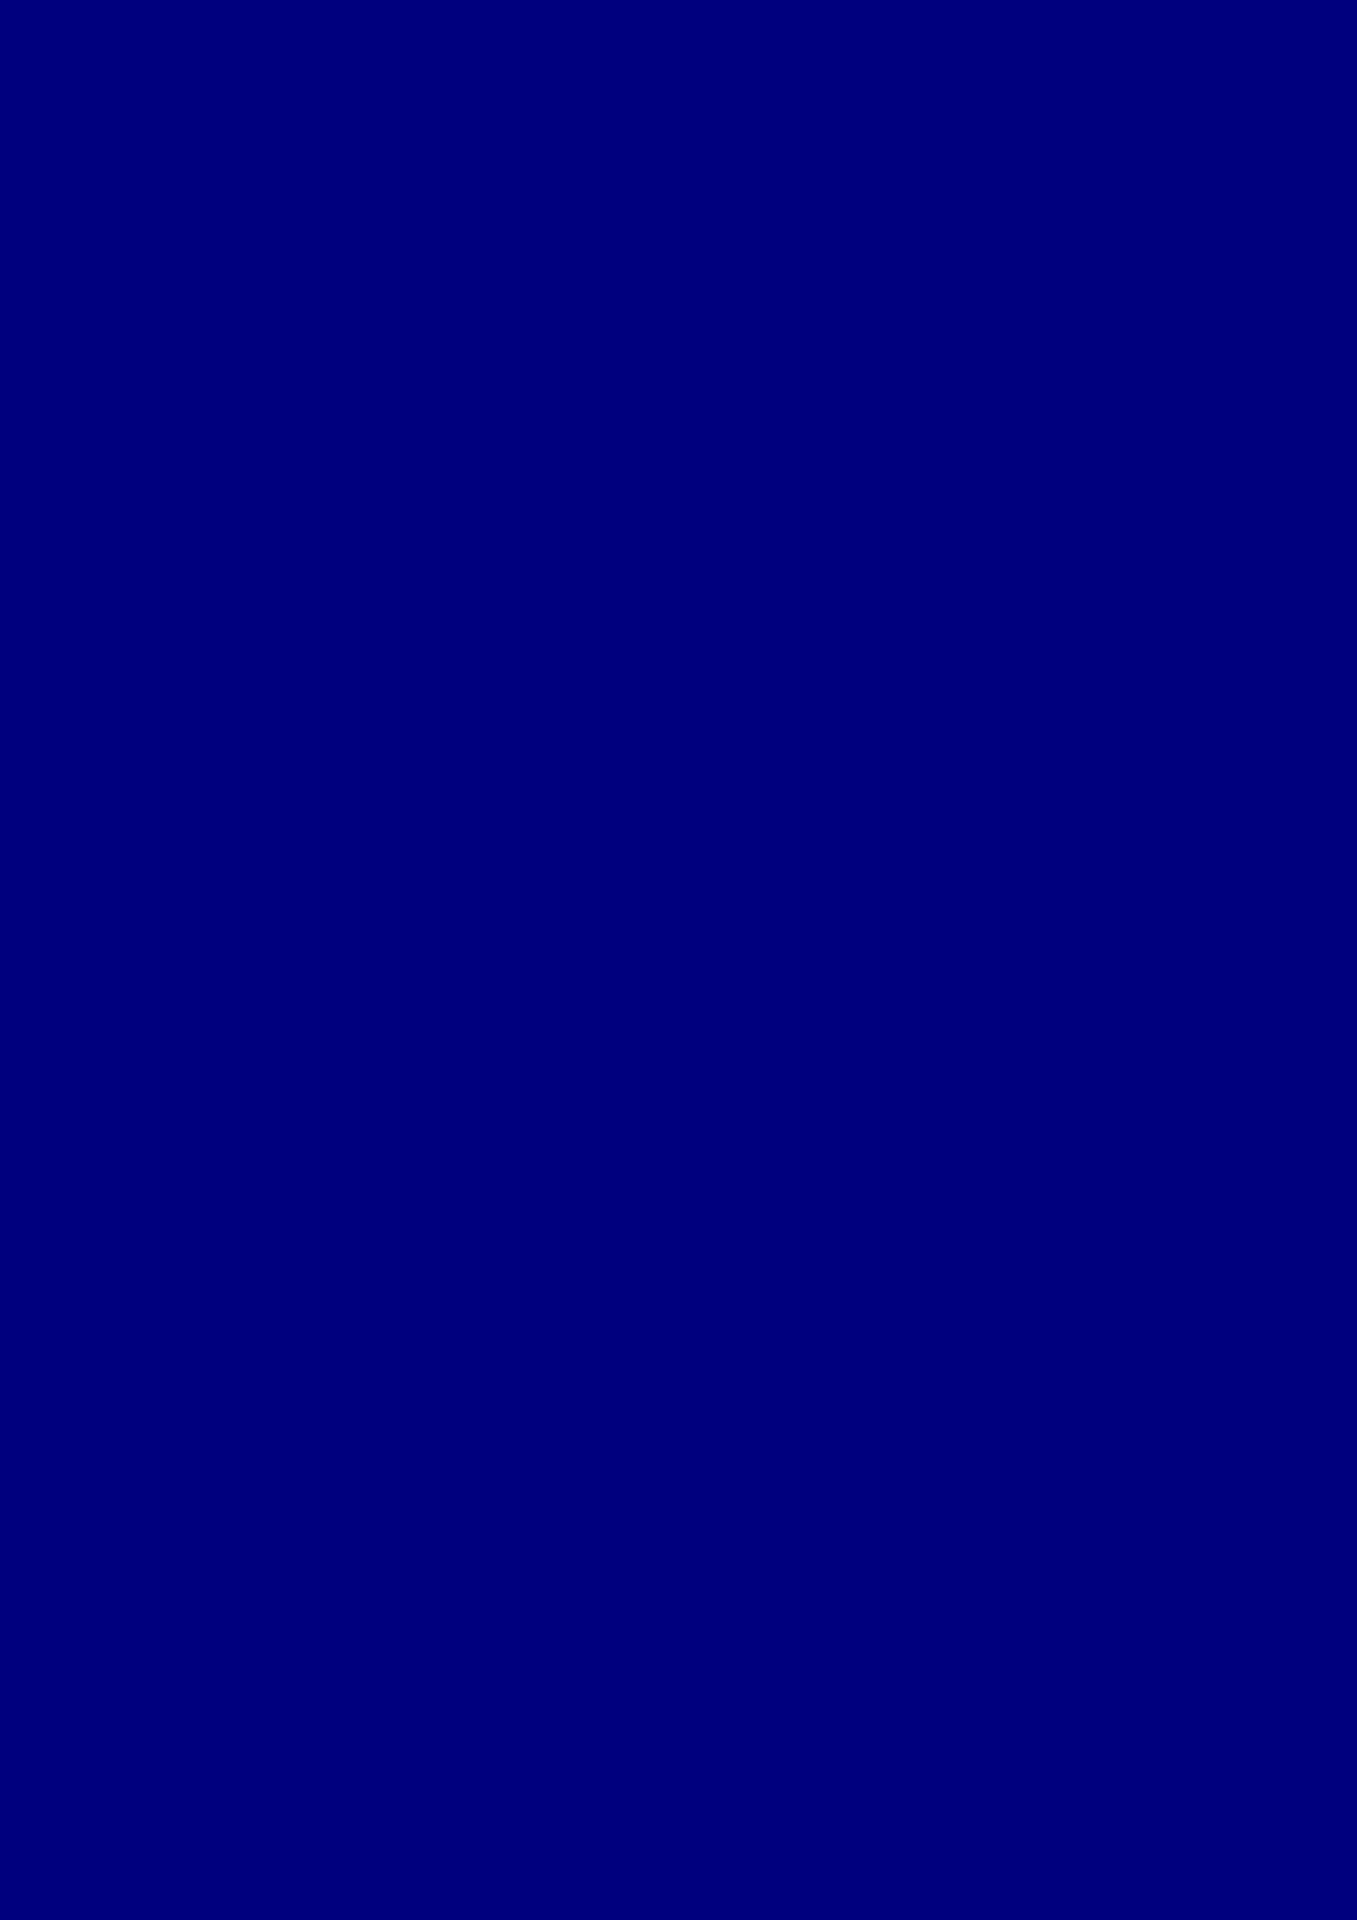 Deep Navy Blue Abstract Space